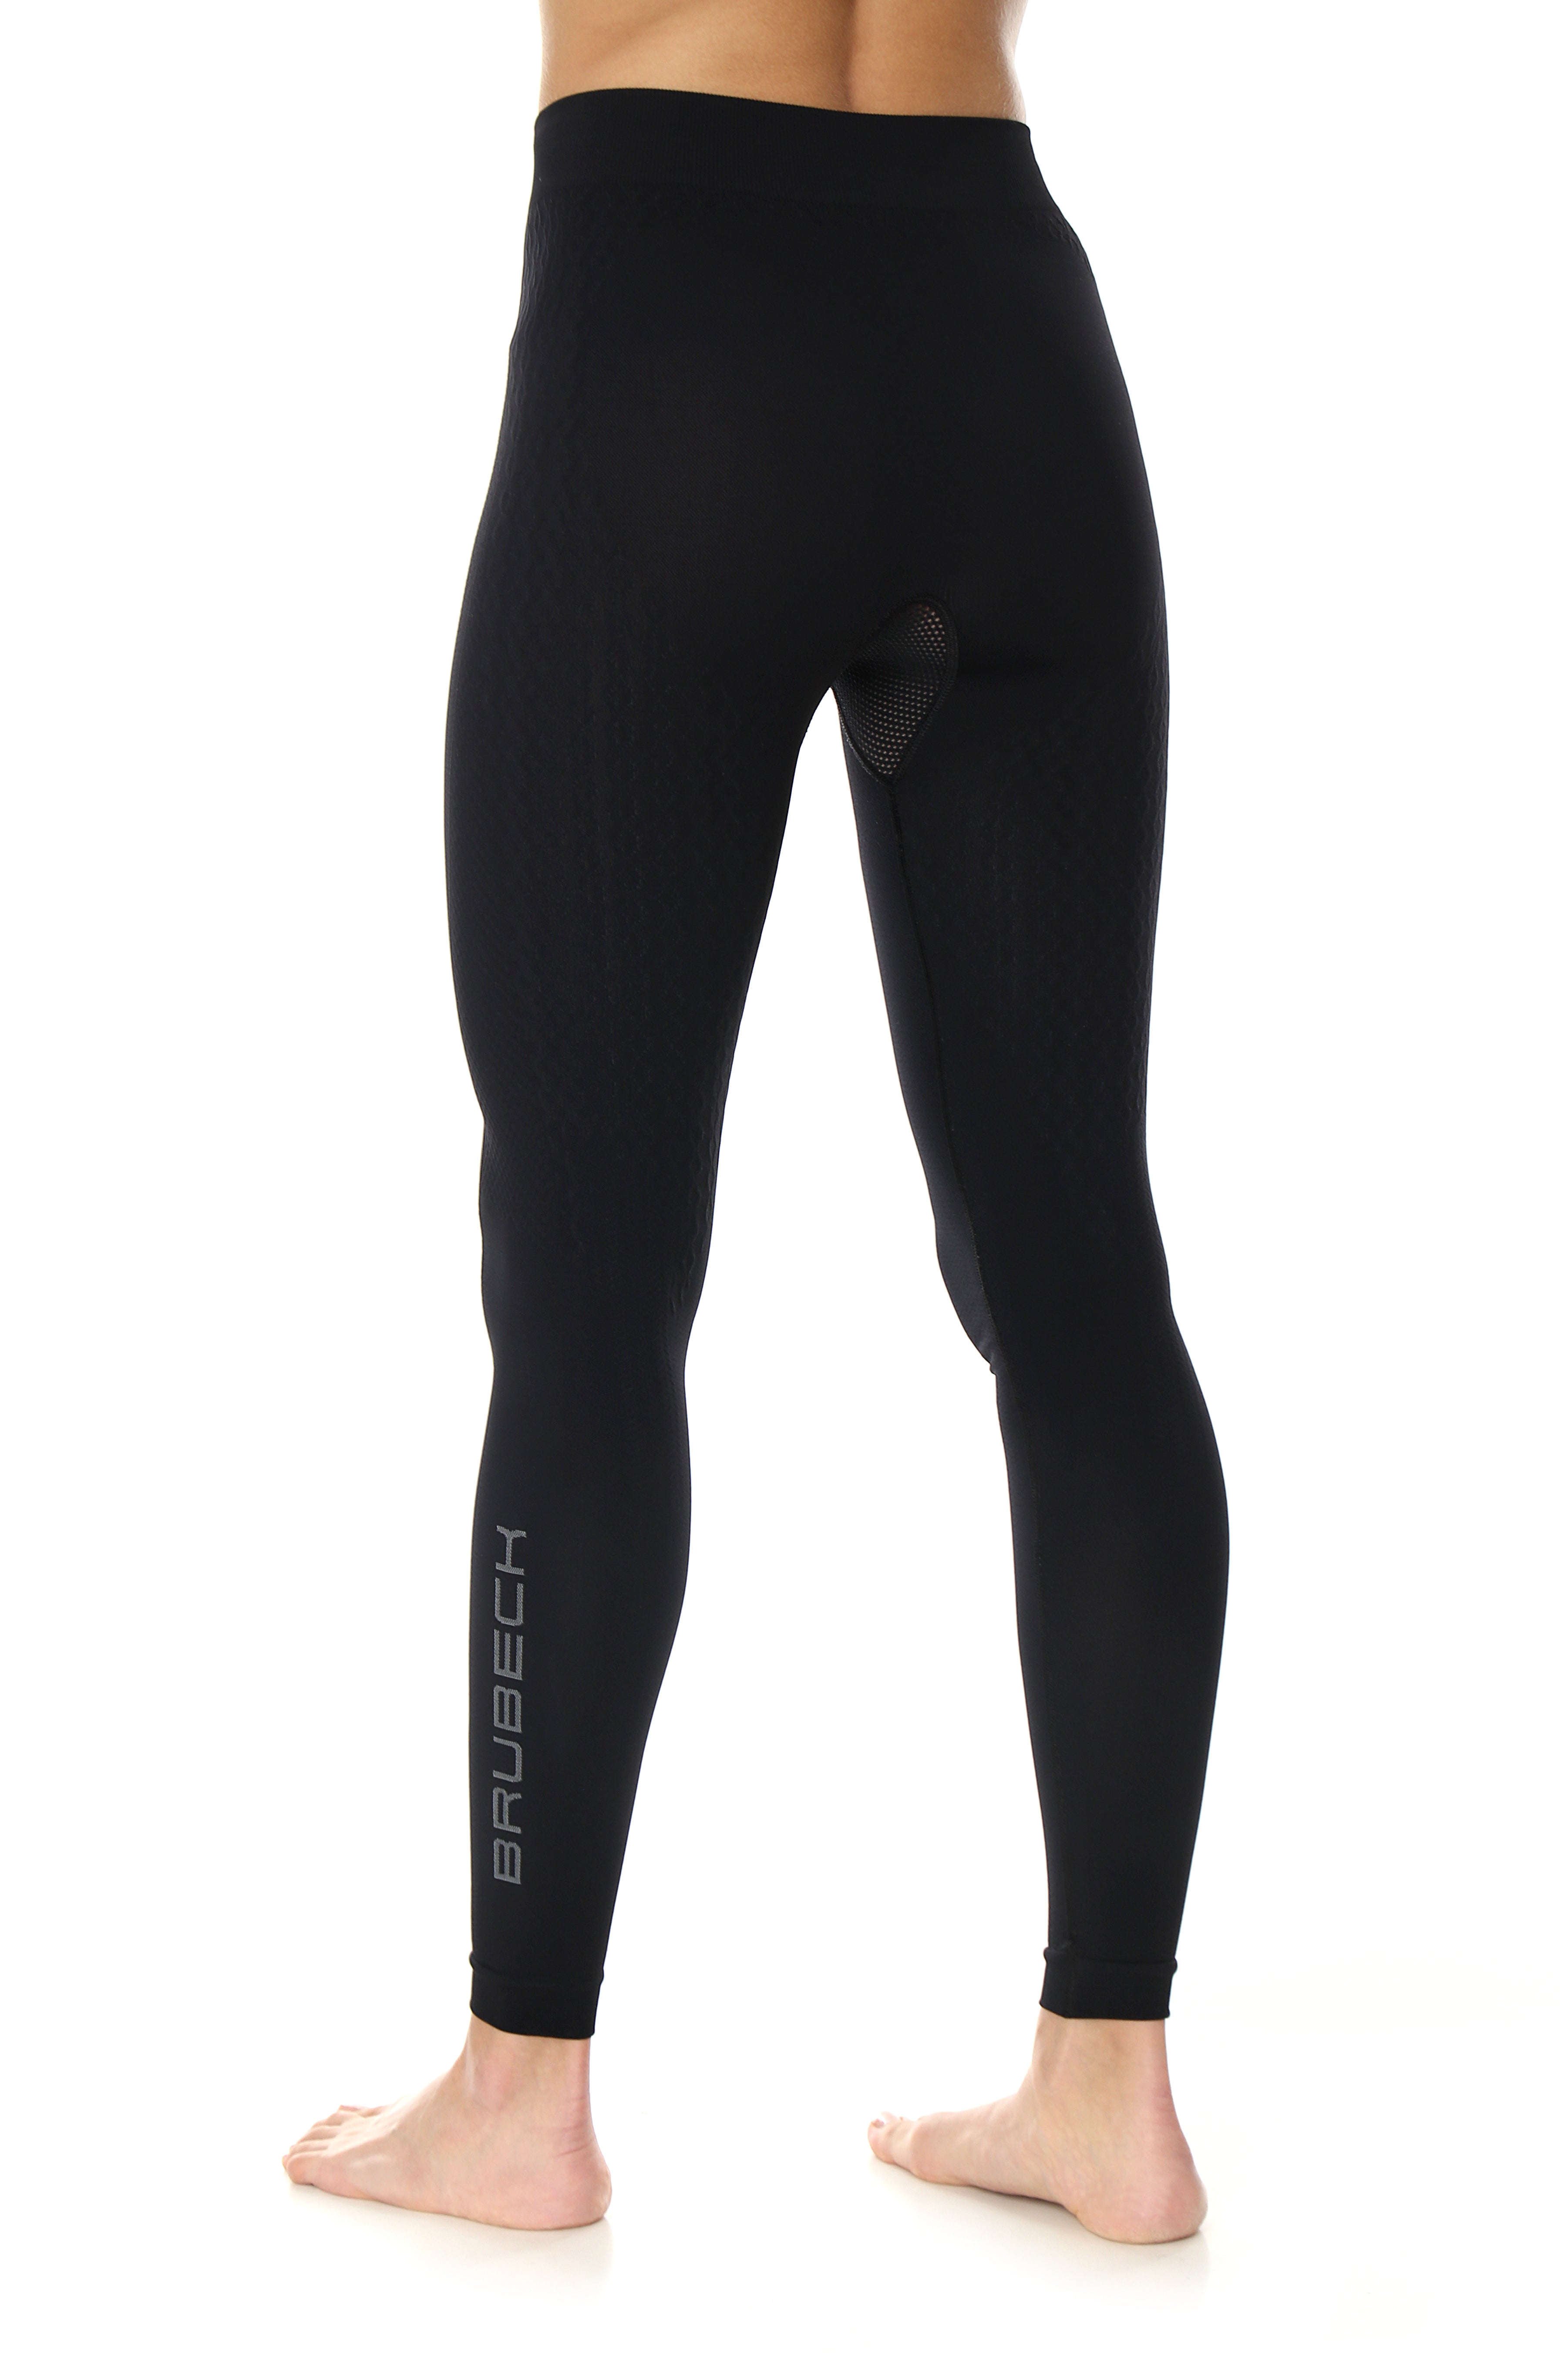 Women's Extreme Thermo Pants